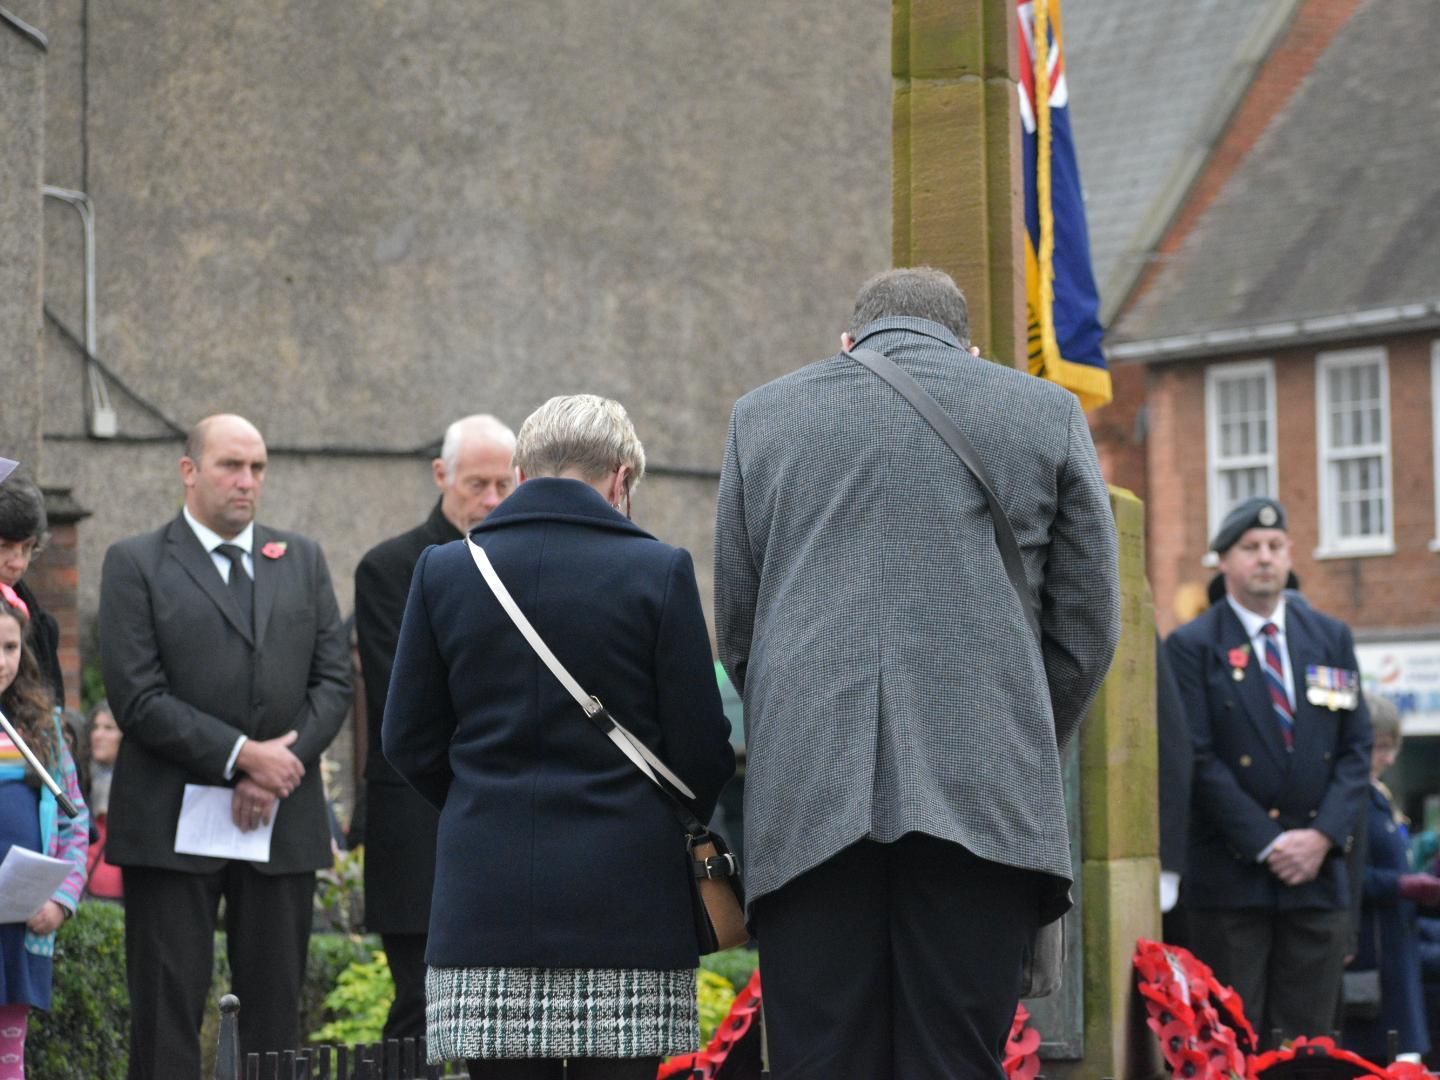 Crowds gather in Lutterworth for the Remembrance service.